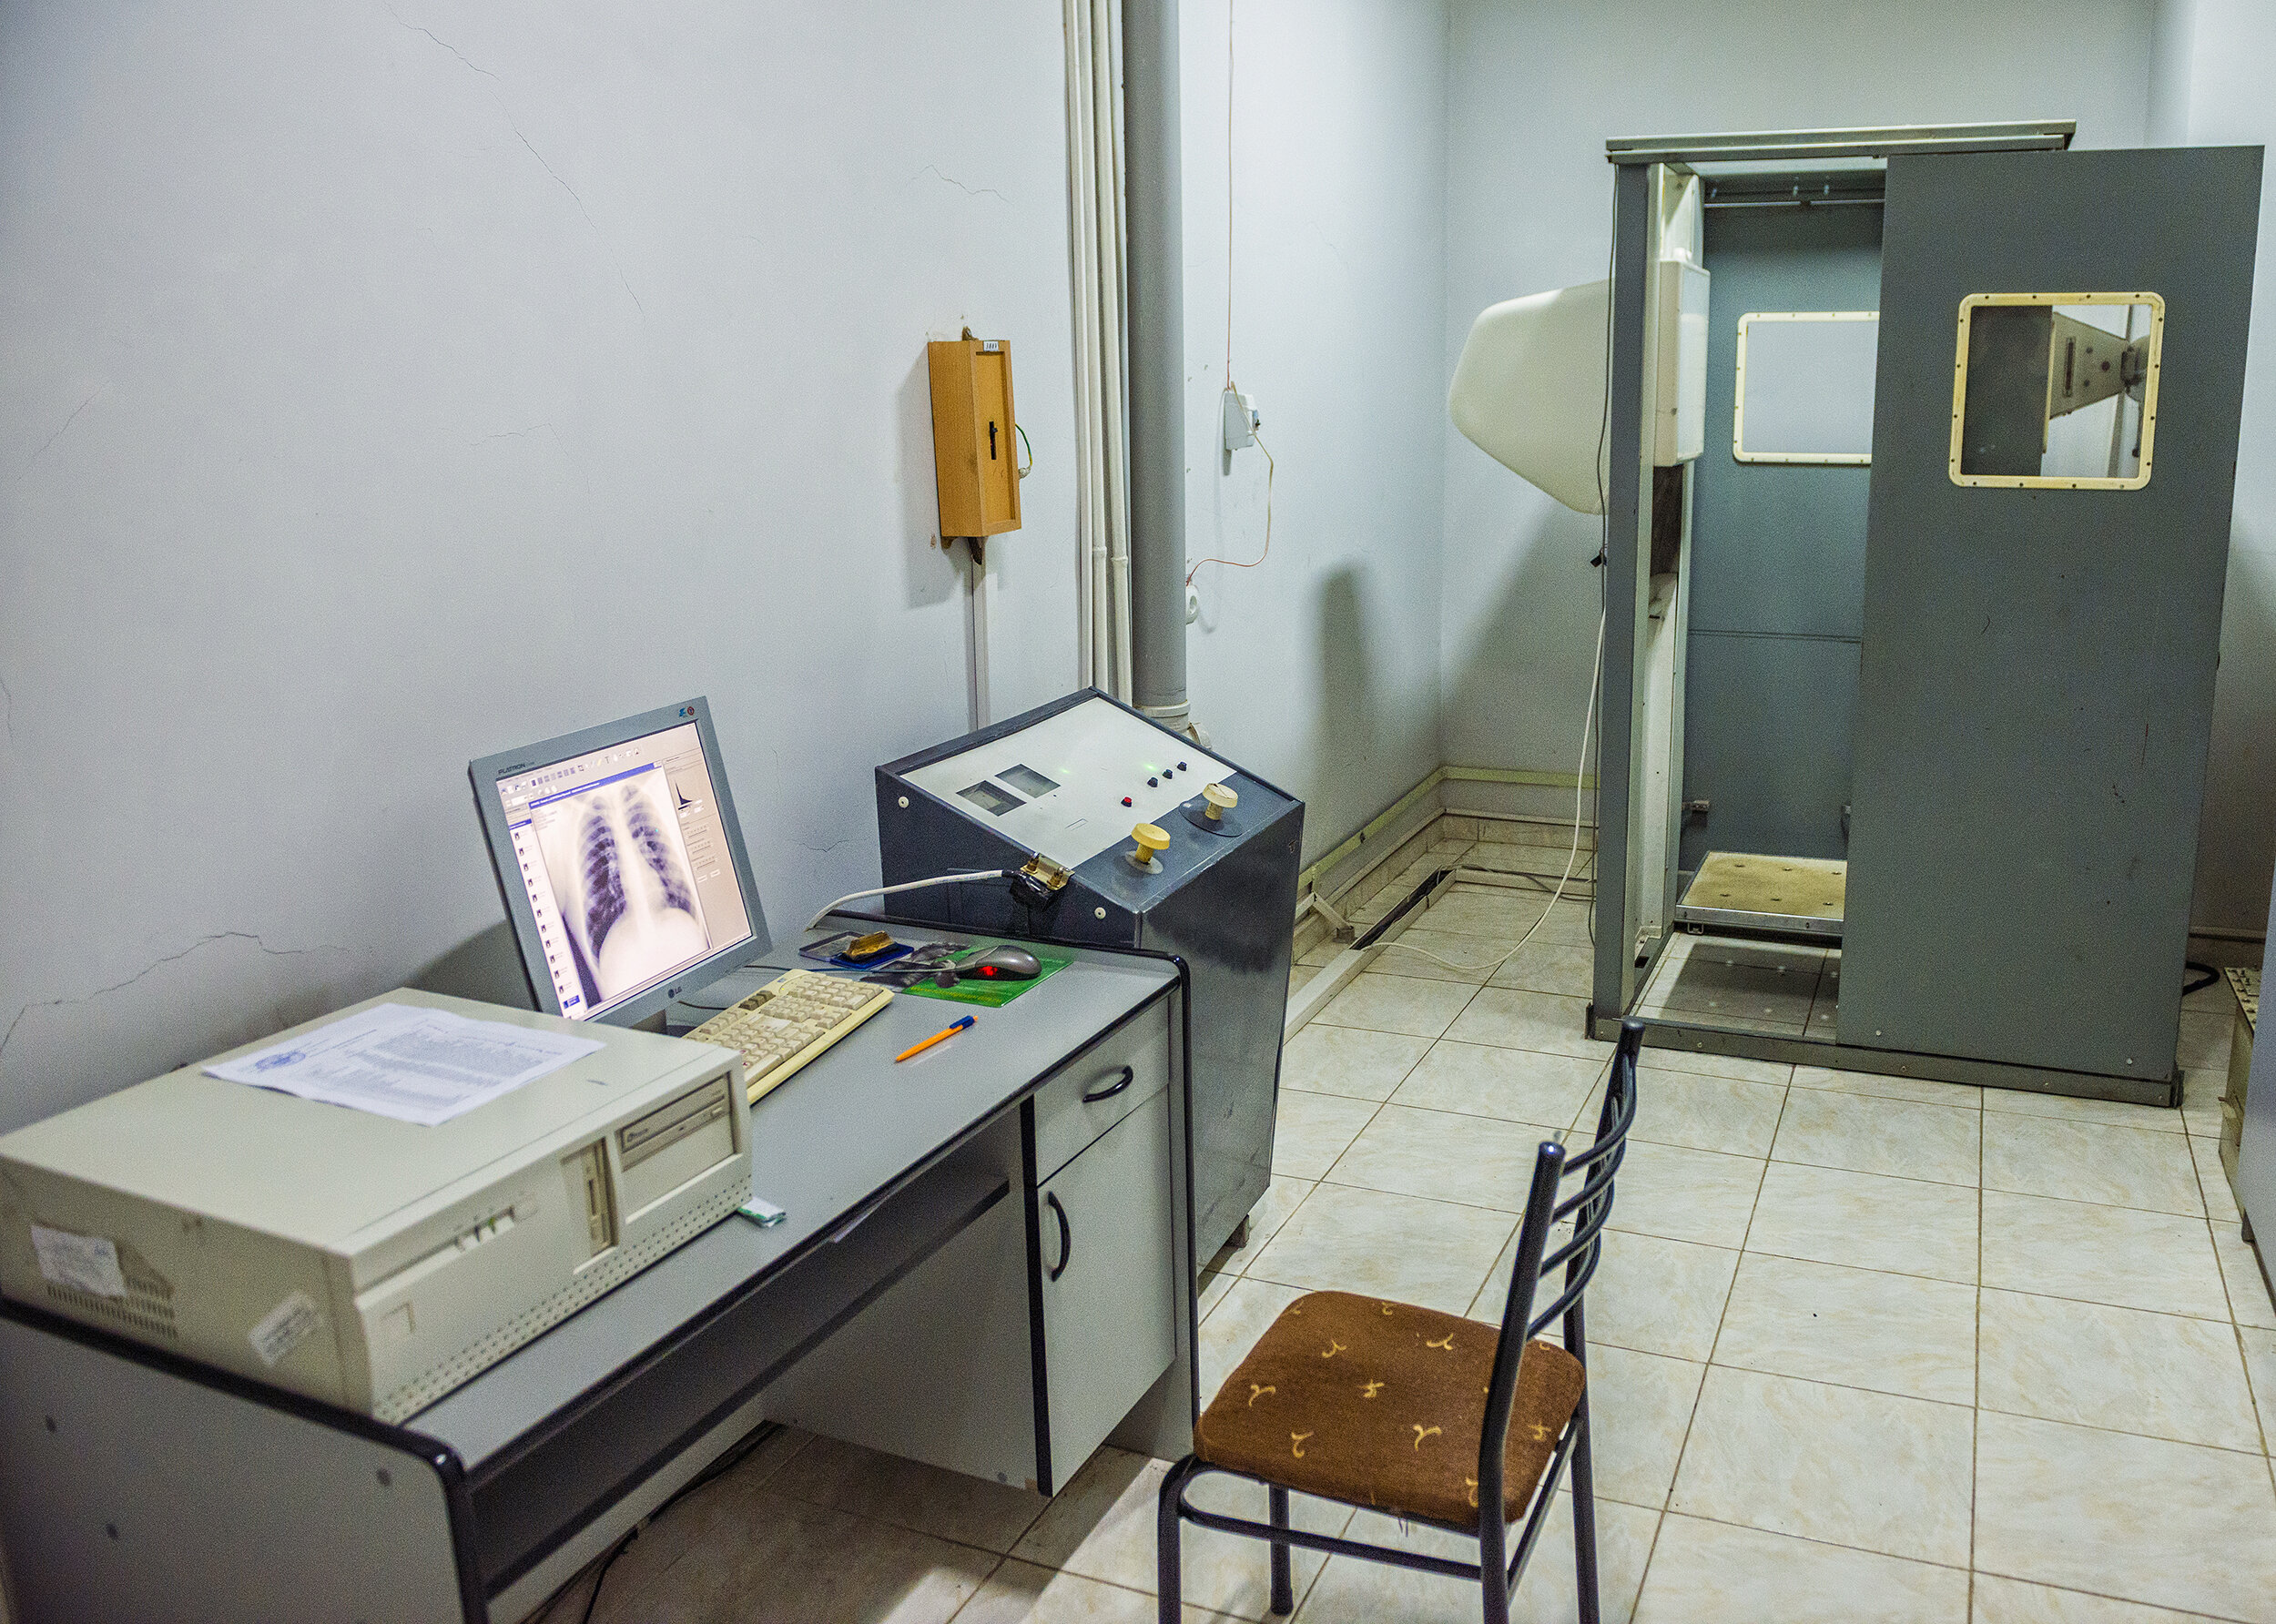  An X-ray machine stands with a monitor showing a patient’s chest at Stepanakert Central Military Hospital in Nagorno-Karabakh.  Stepanakert was besieged and fiercely bombarded for months during the 1992 Nagorno-Karabakh War. Over two decades later, 